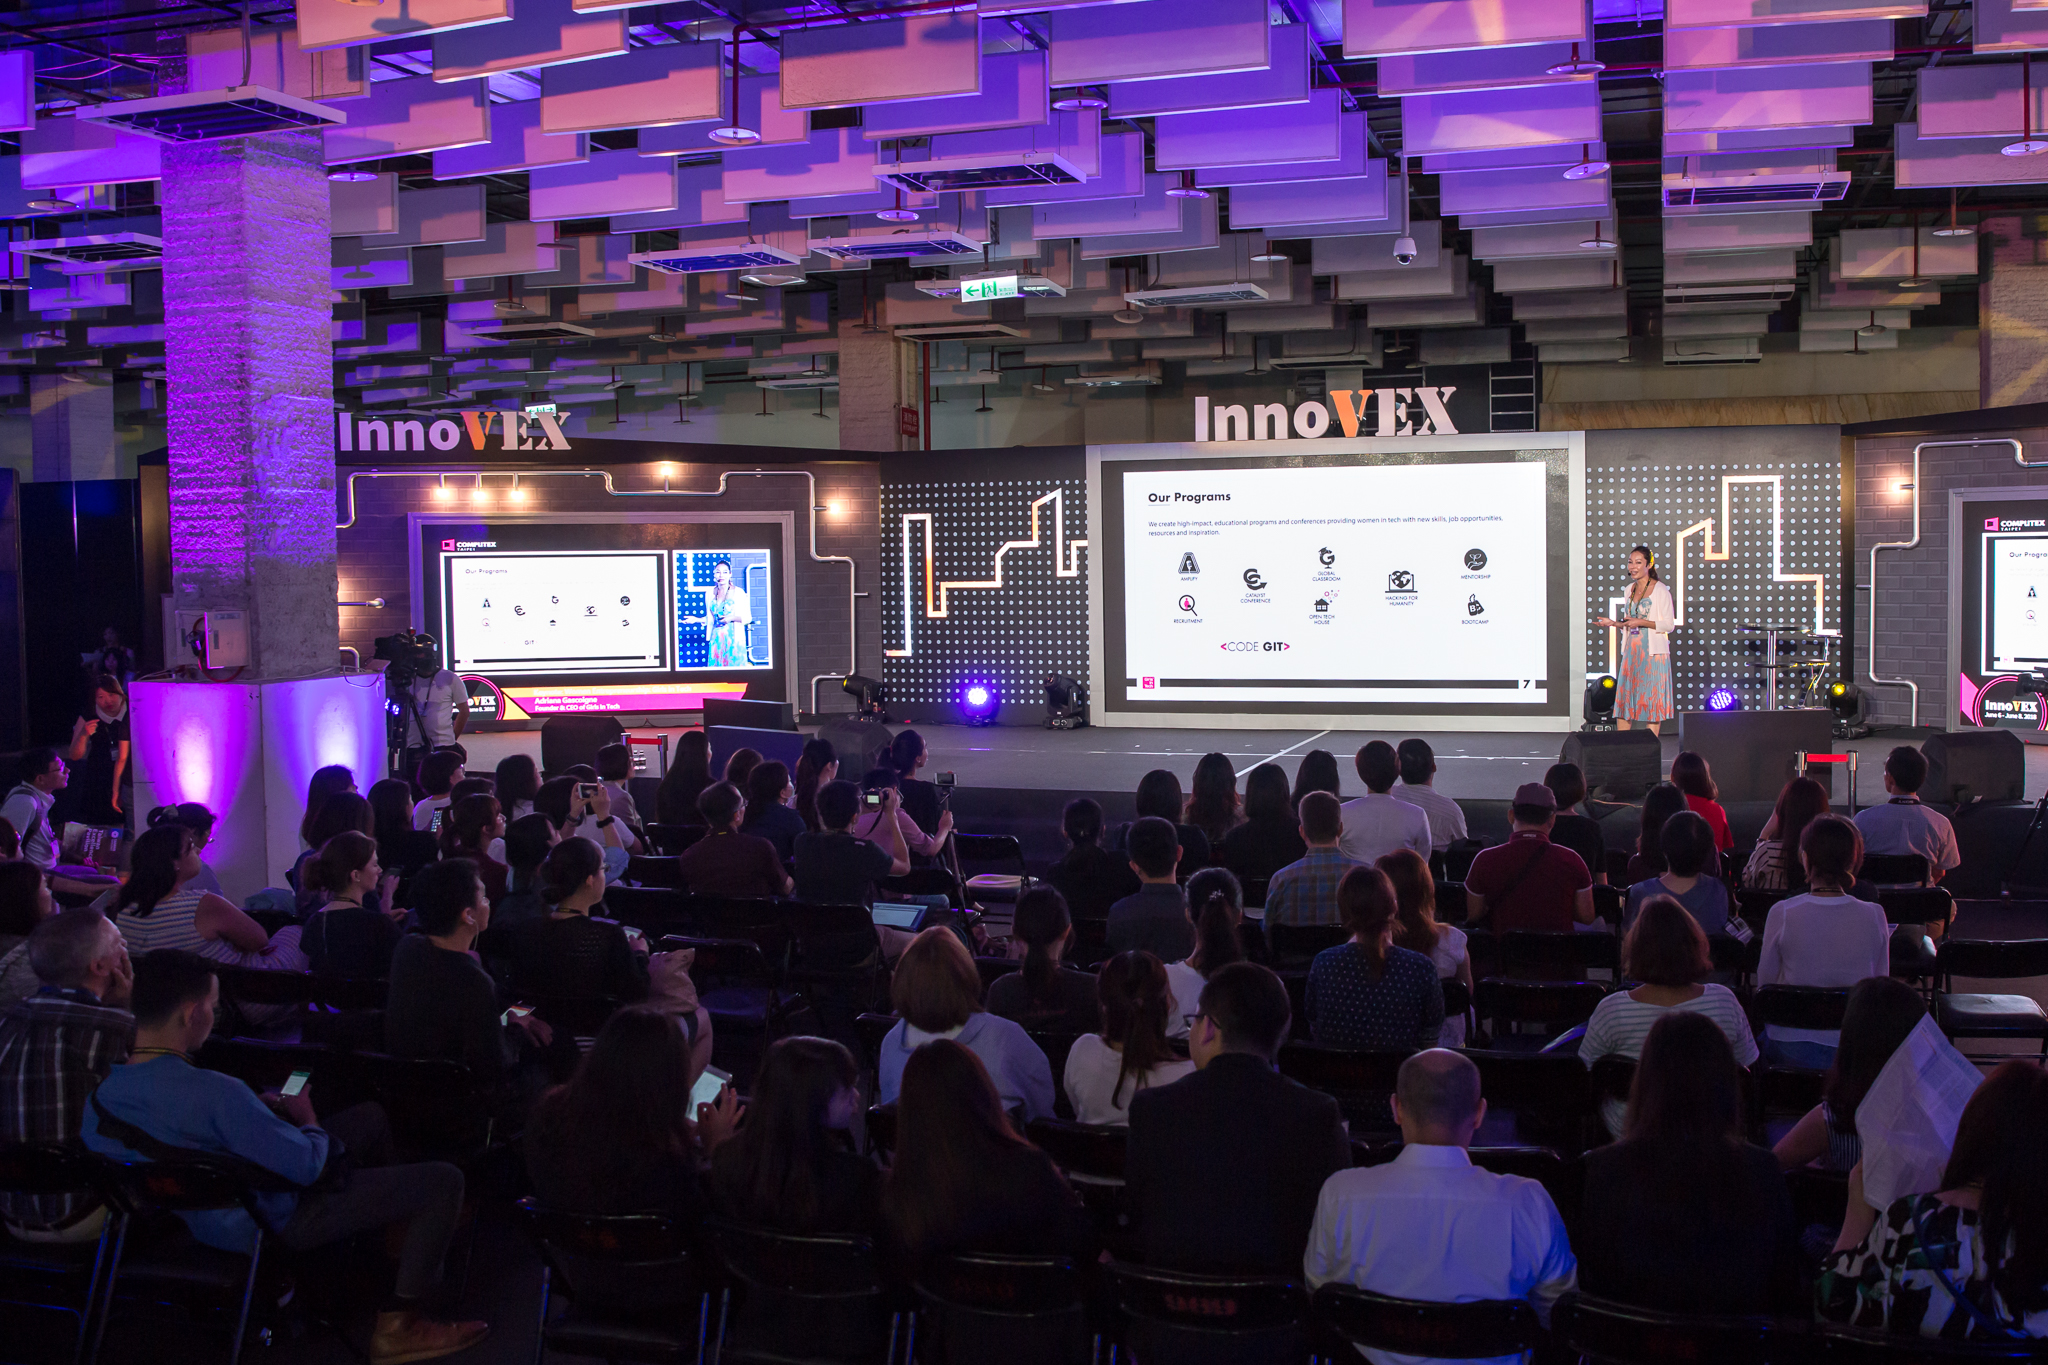 You Shouldn’t Miss These 5 Key Events at InnoVEX 2019